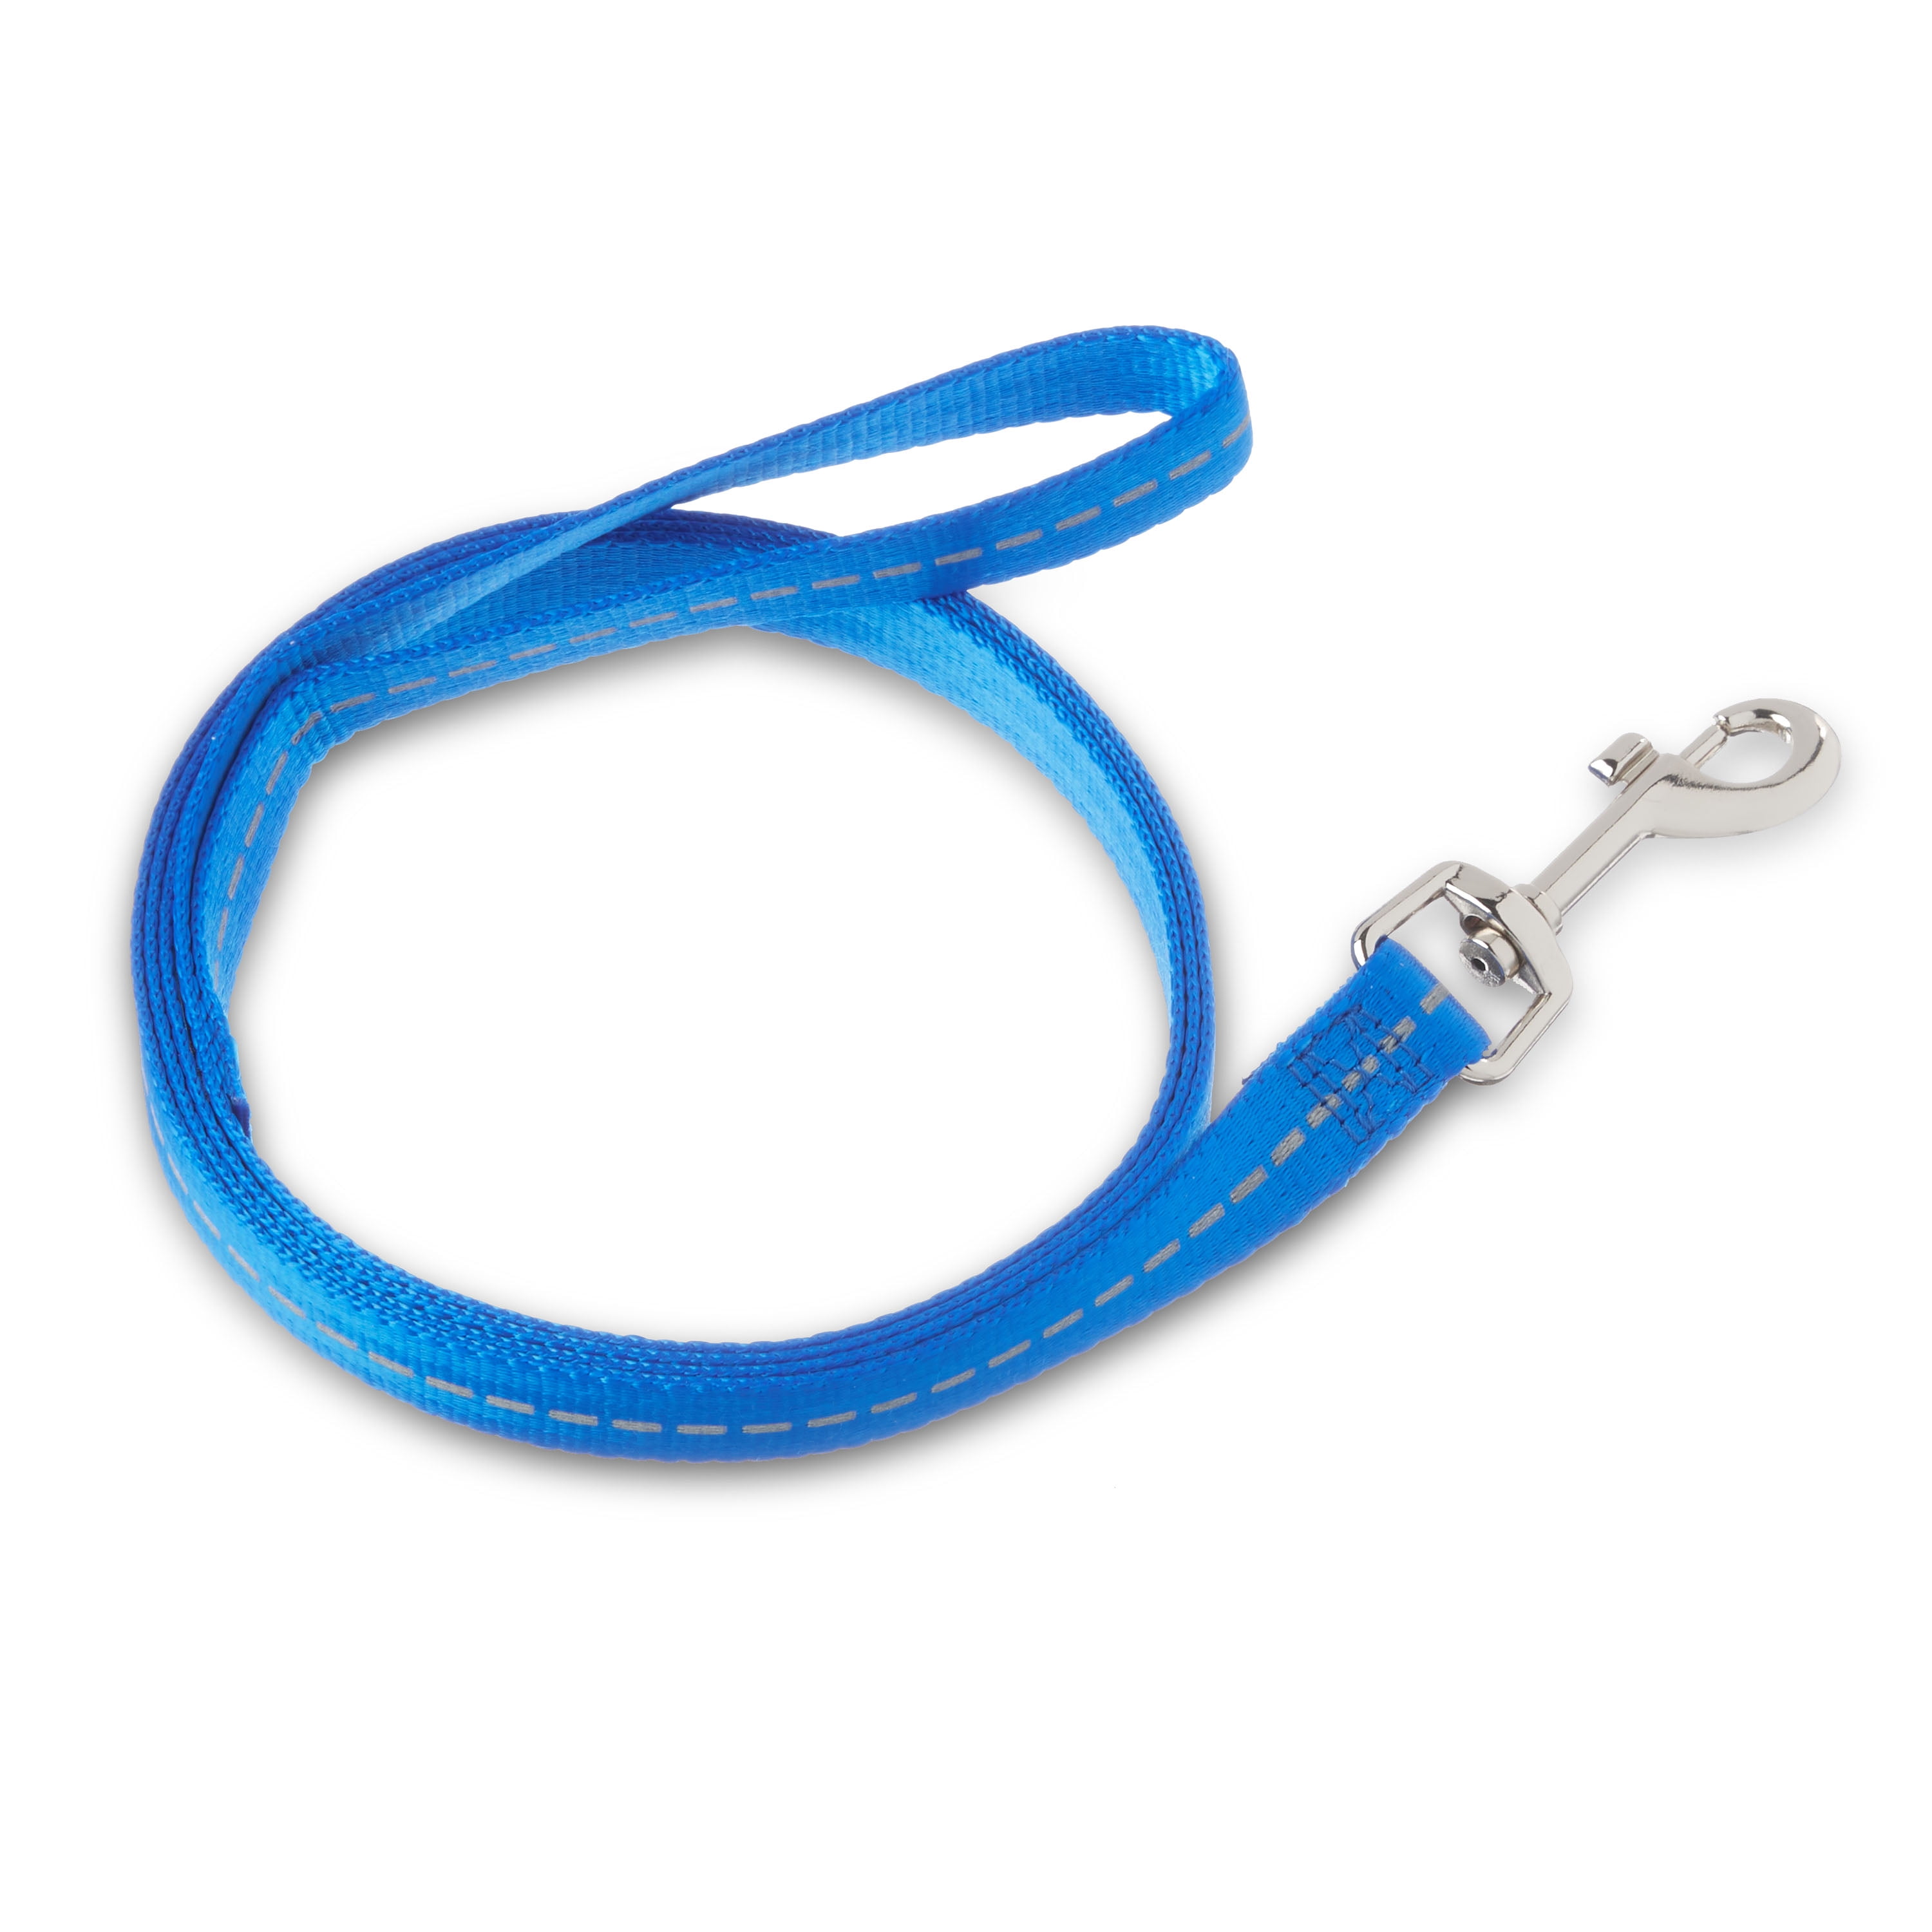 58 Biothane 2 Handle Leash D-Ring at Handle Assortment of Colors Widths & Lengths Available